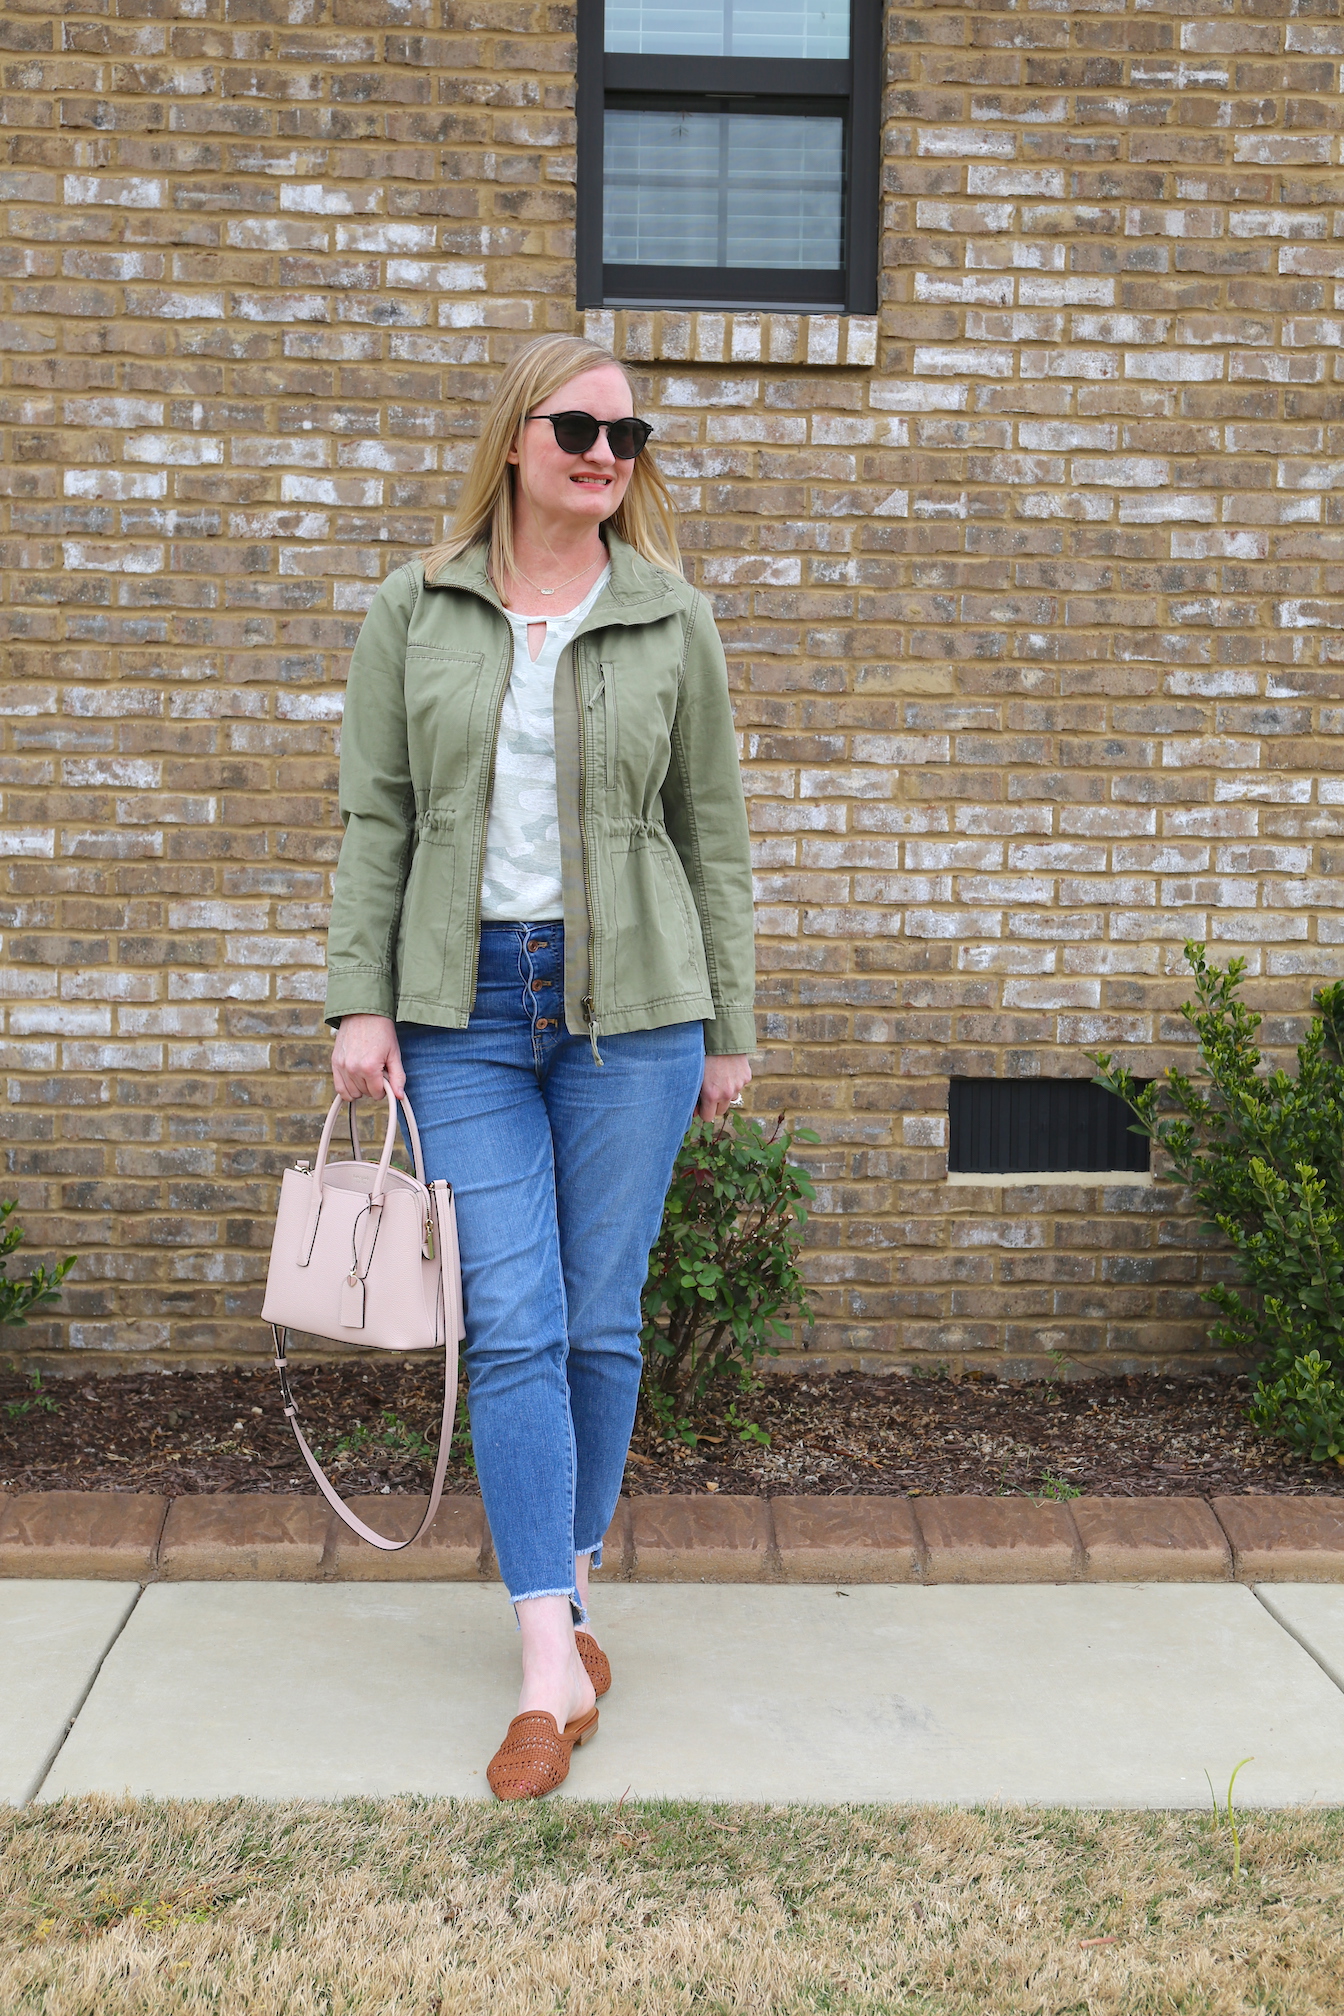 OOTD: Love for Heritage 365 Camo Green Twill - I got the matching